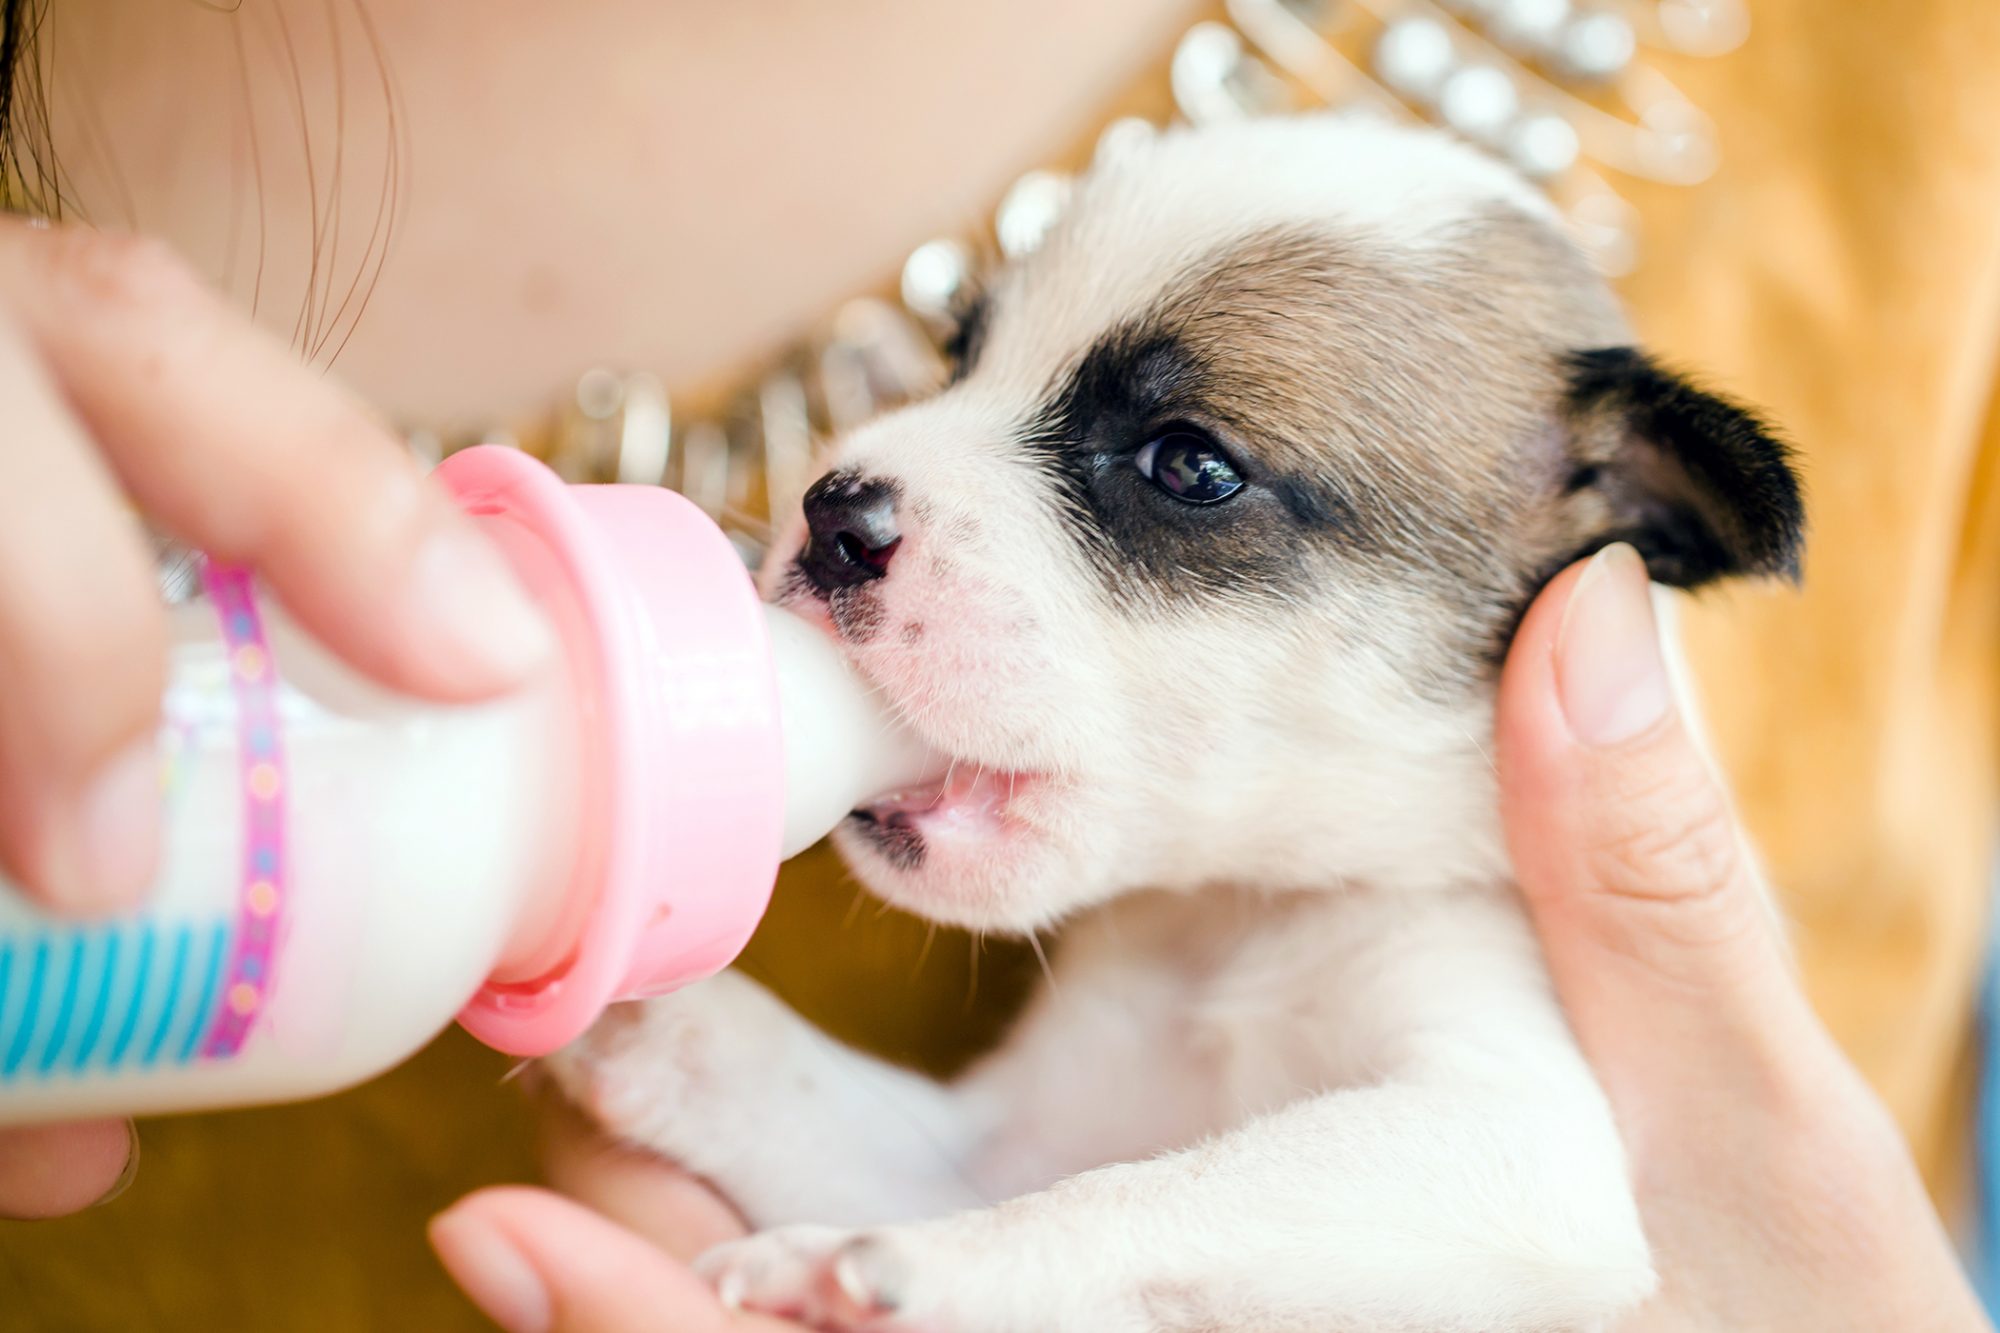 what kind of milk can puppies drink